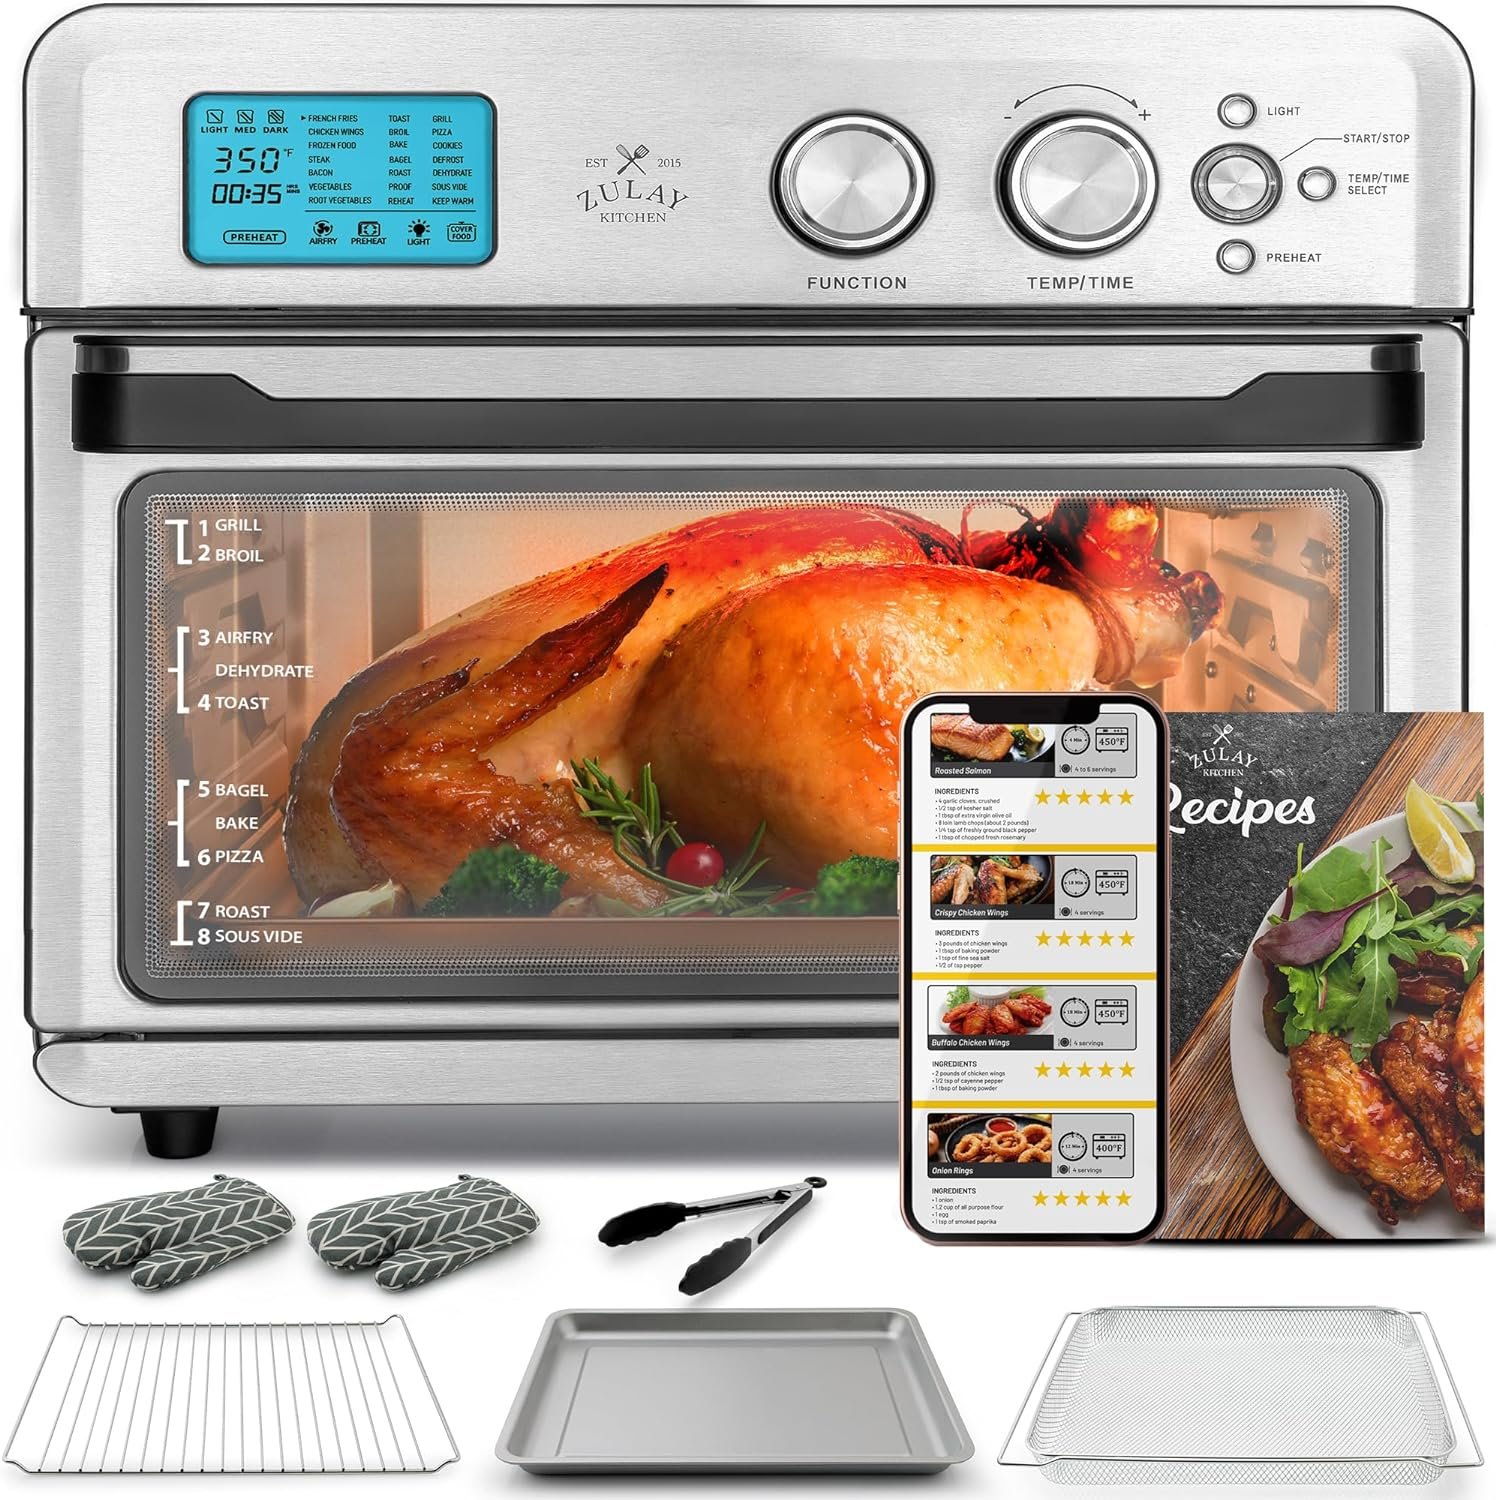 Zulay Large Countertop Air Fryer - Stainless Steel Airfryer Toaster Oven Combo with 21 Functions - 26.4Qt Capacity Stainless Steel Convection Oven with Toast, Bake, Rotisserie  Dehydrate Options